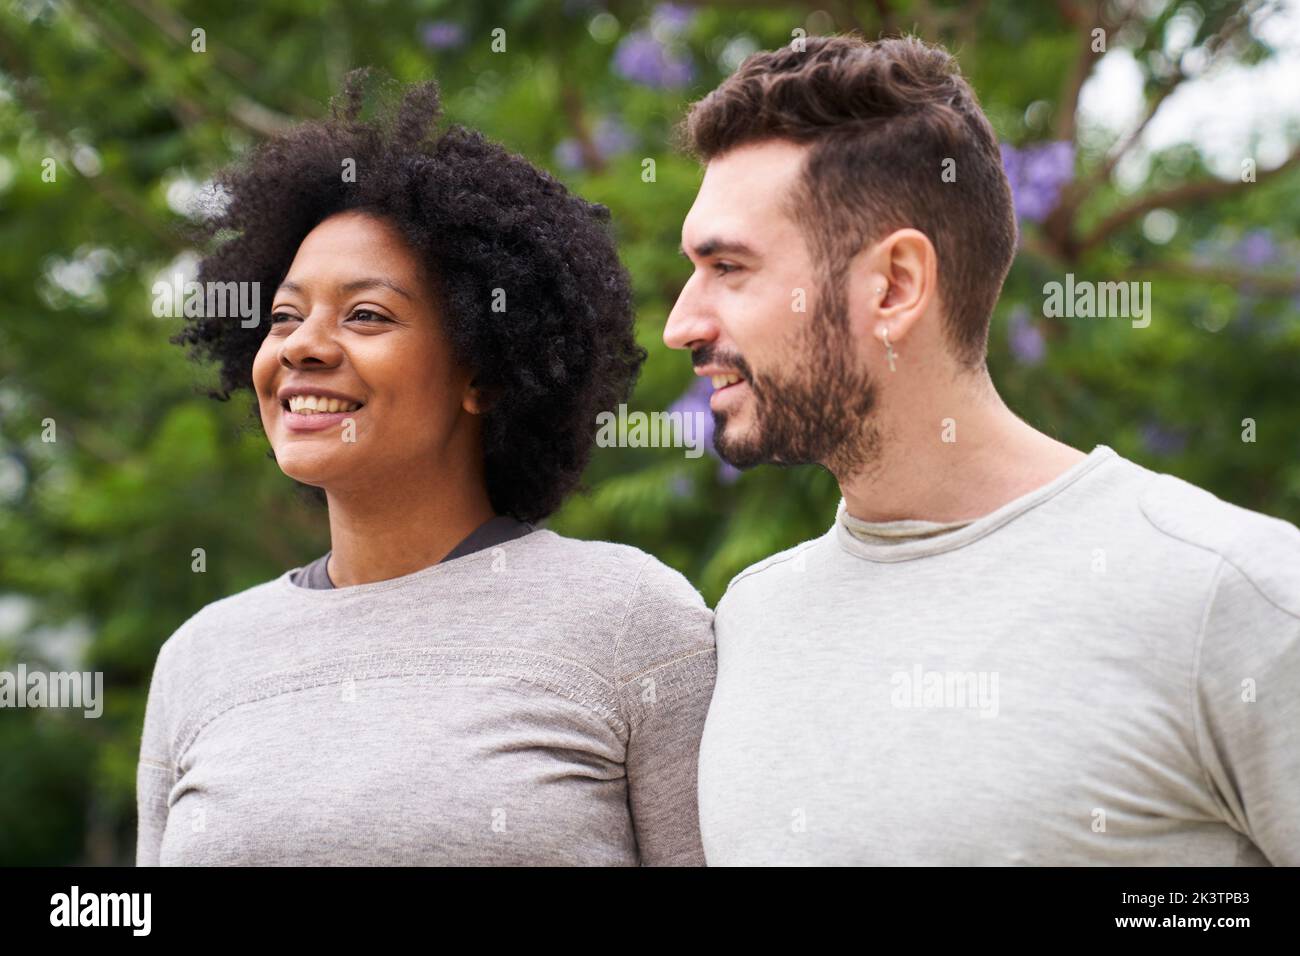 Mid-shot portrait of an African-American woman and Caucasian man having a good time outdoors Stock Photo